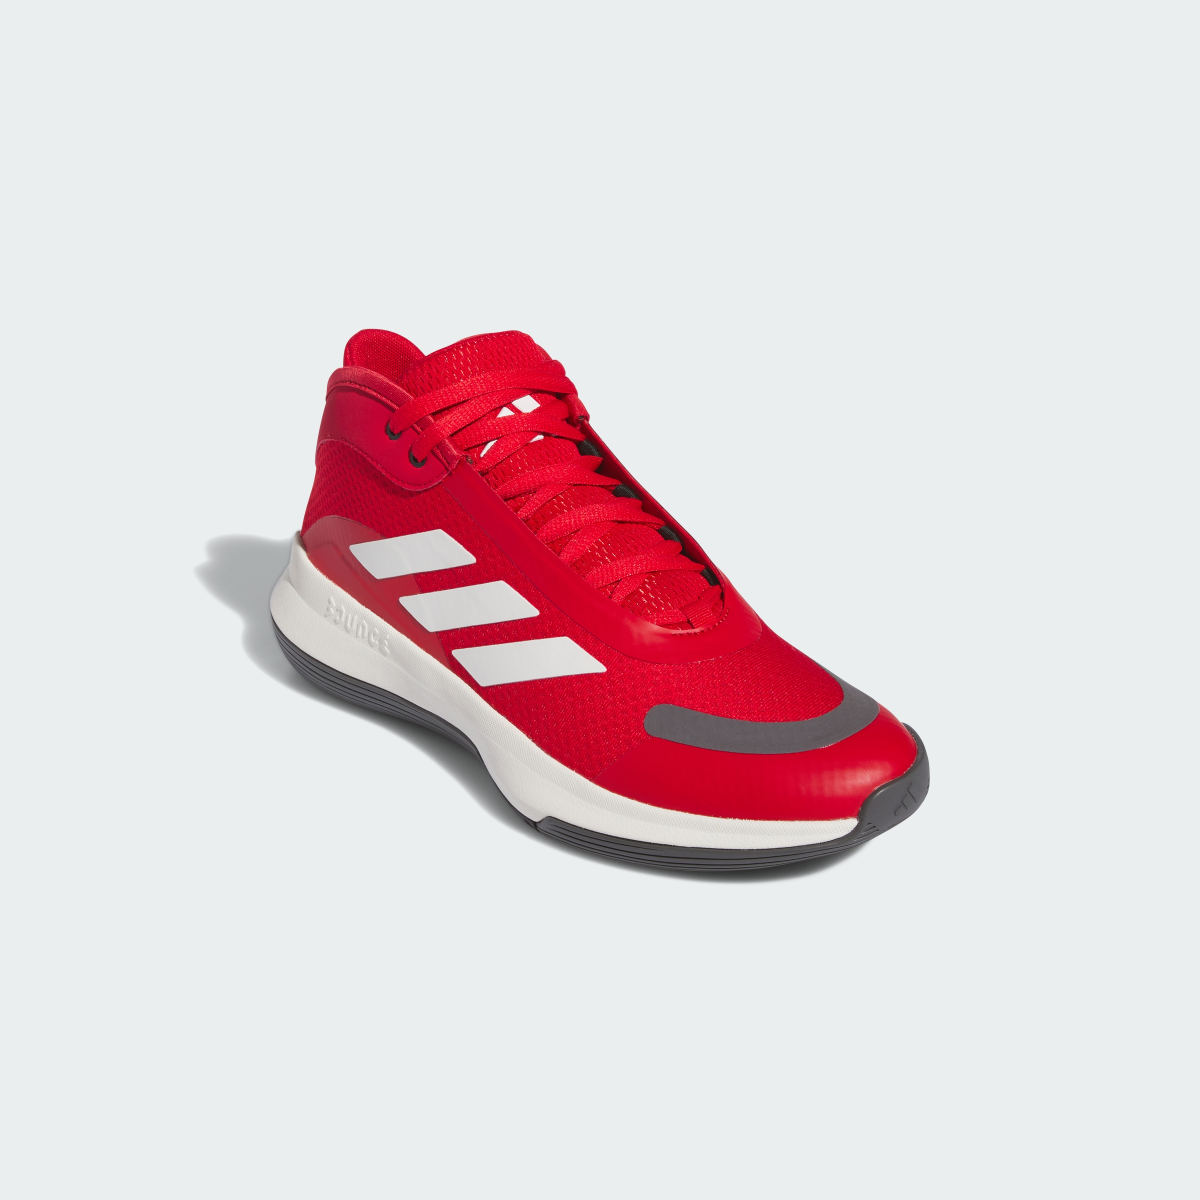 Adidas Bounce Legends Low Basketball Shoes. 7